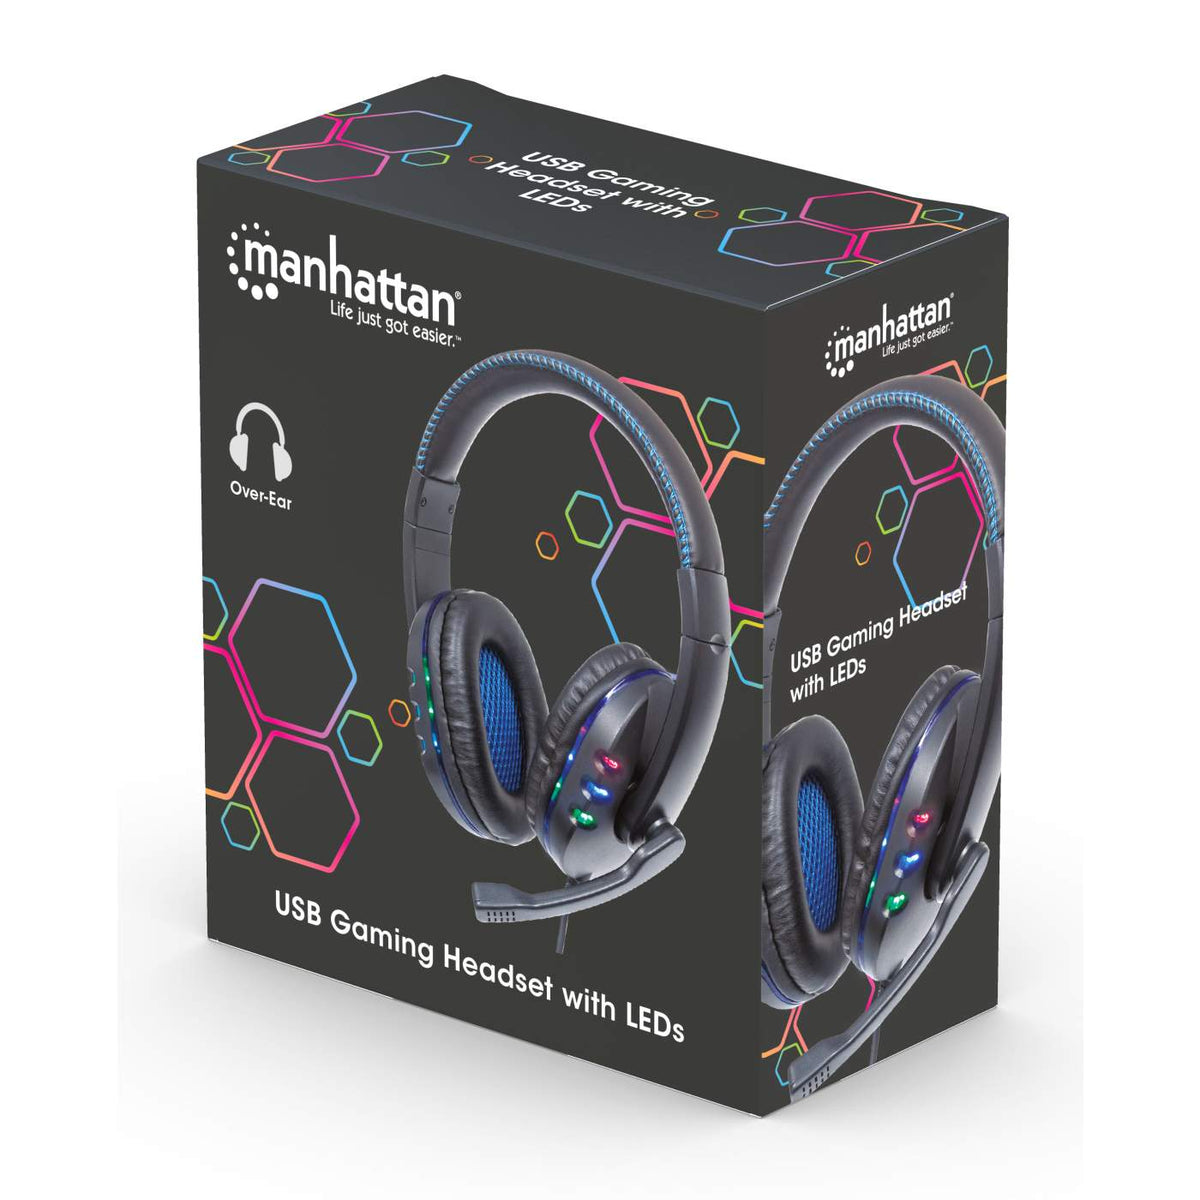 Structureel Specificiteit Italiaans Manhattan USB Gaming Headset with LEDs (176088)